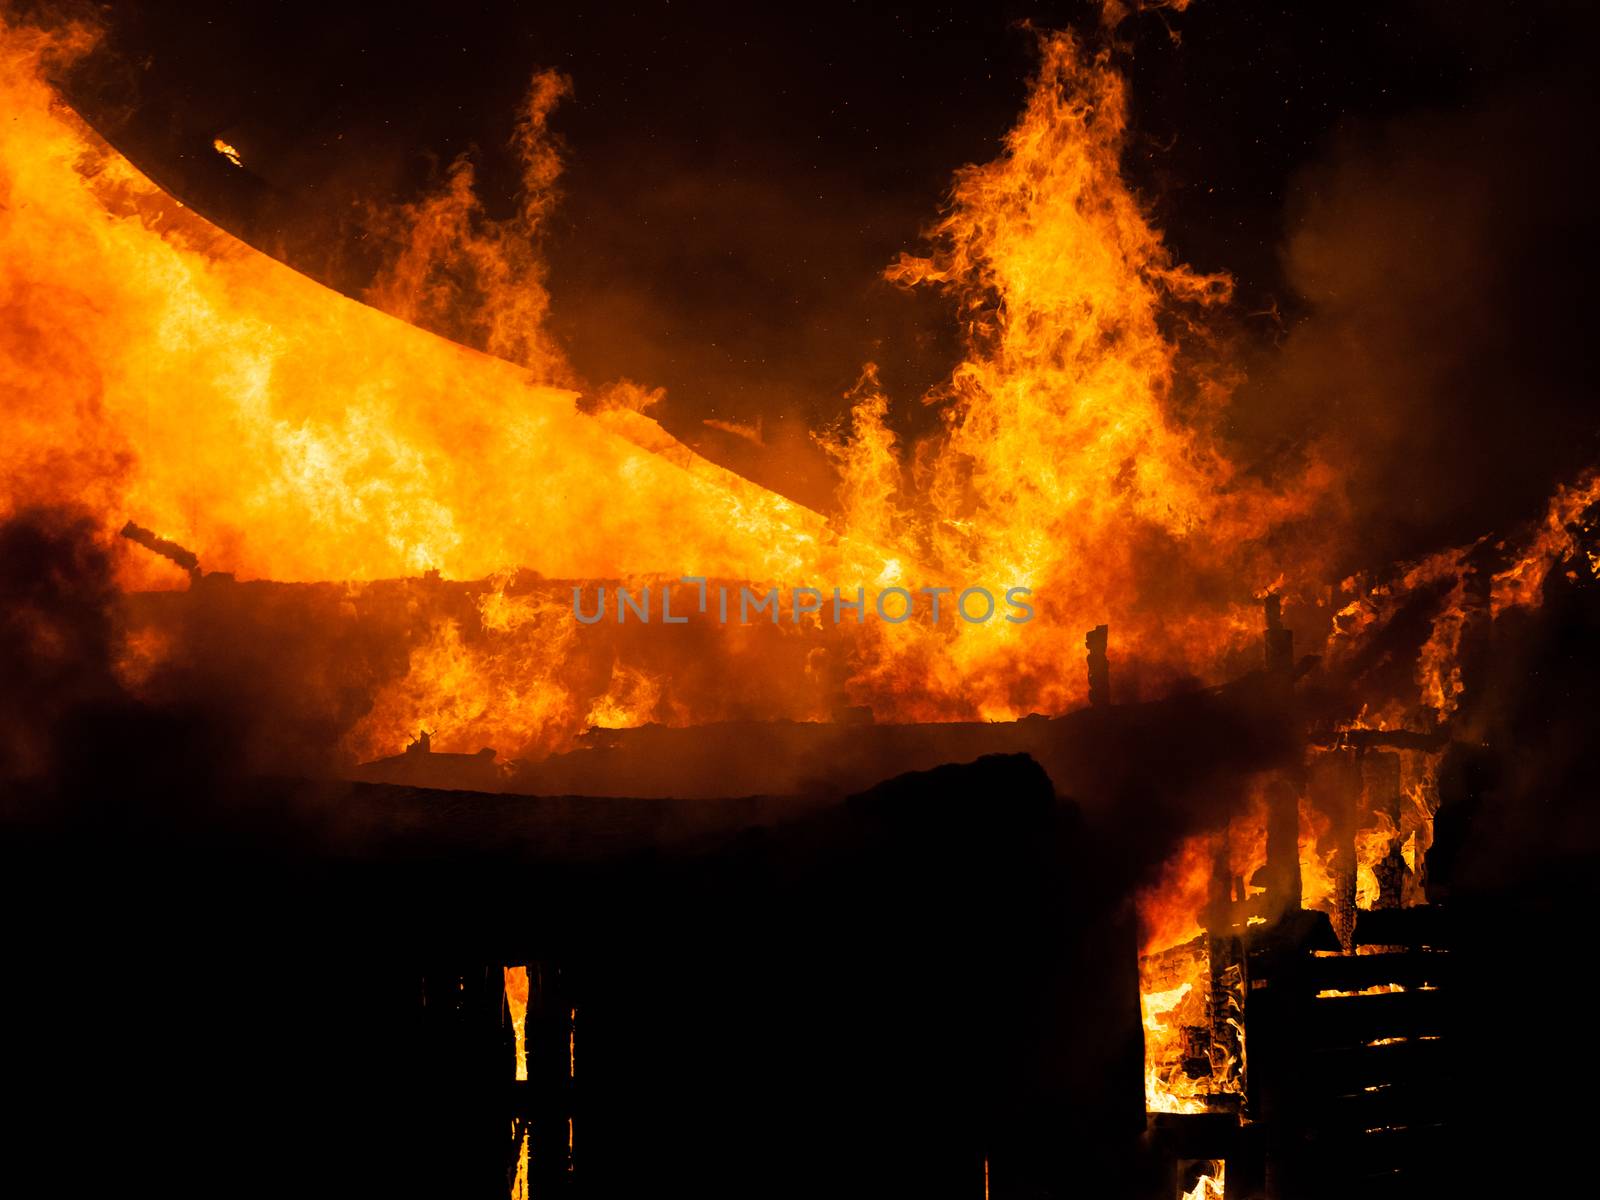 Burning fire flame on wooden house roof by ia_64